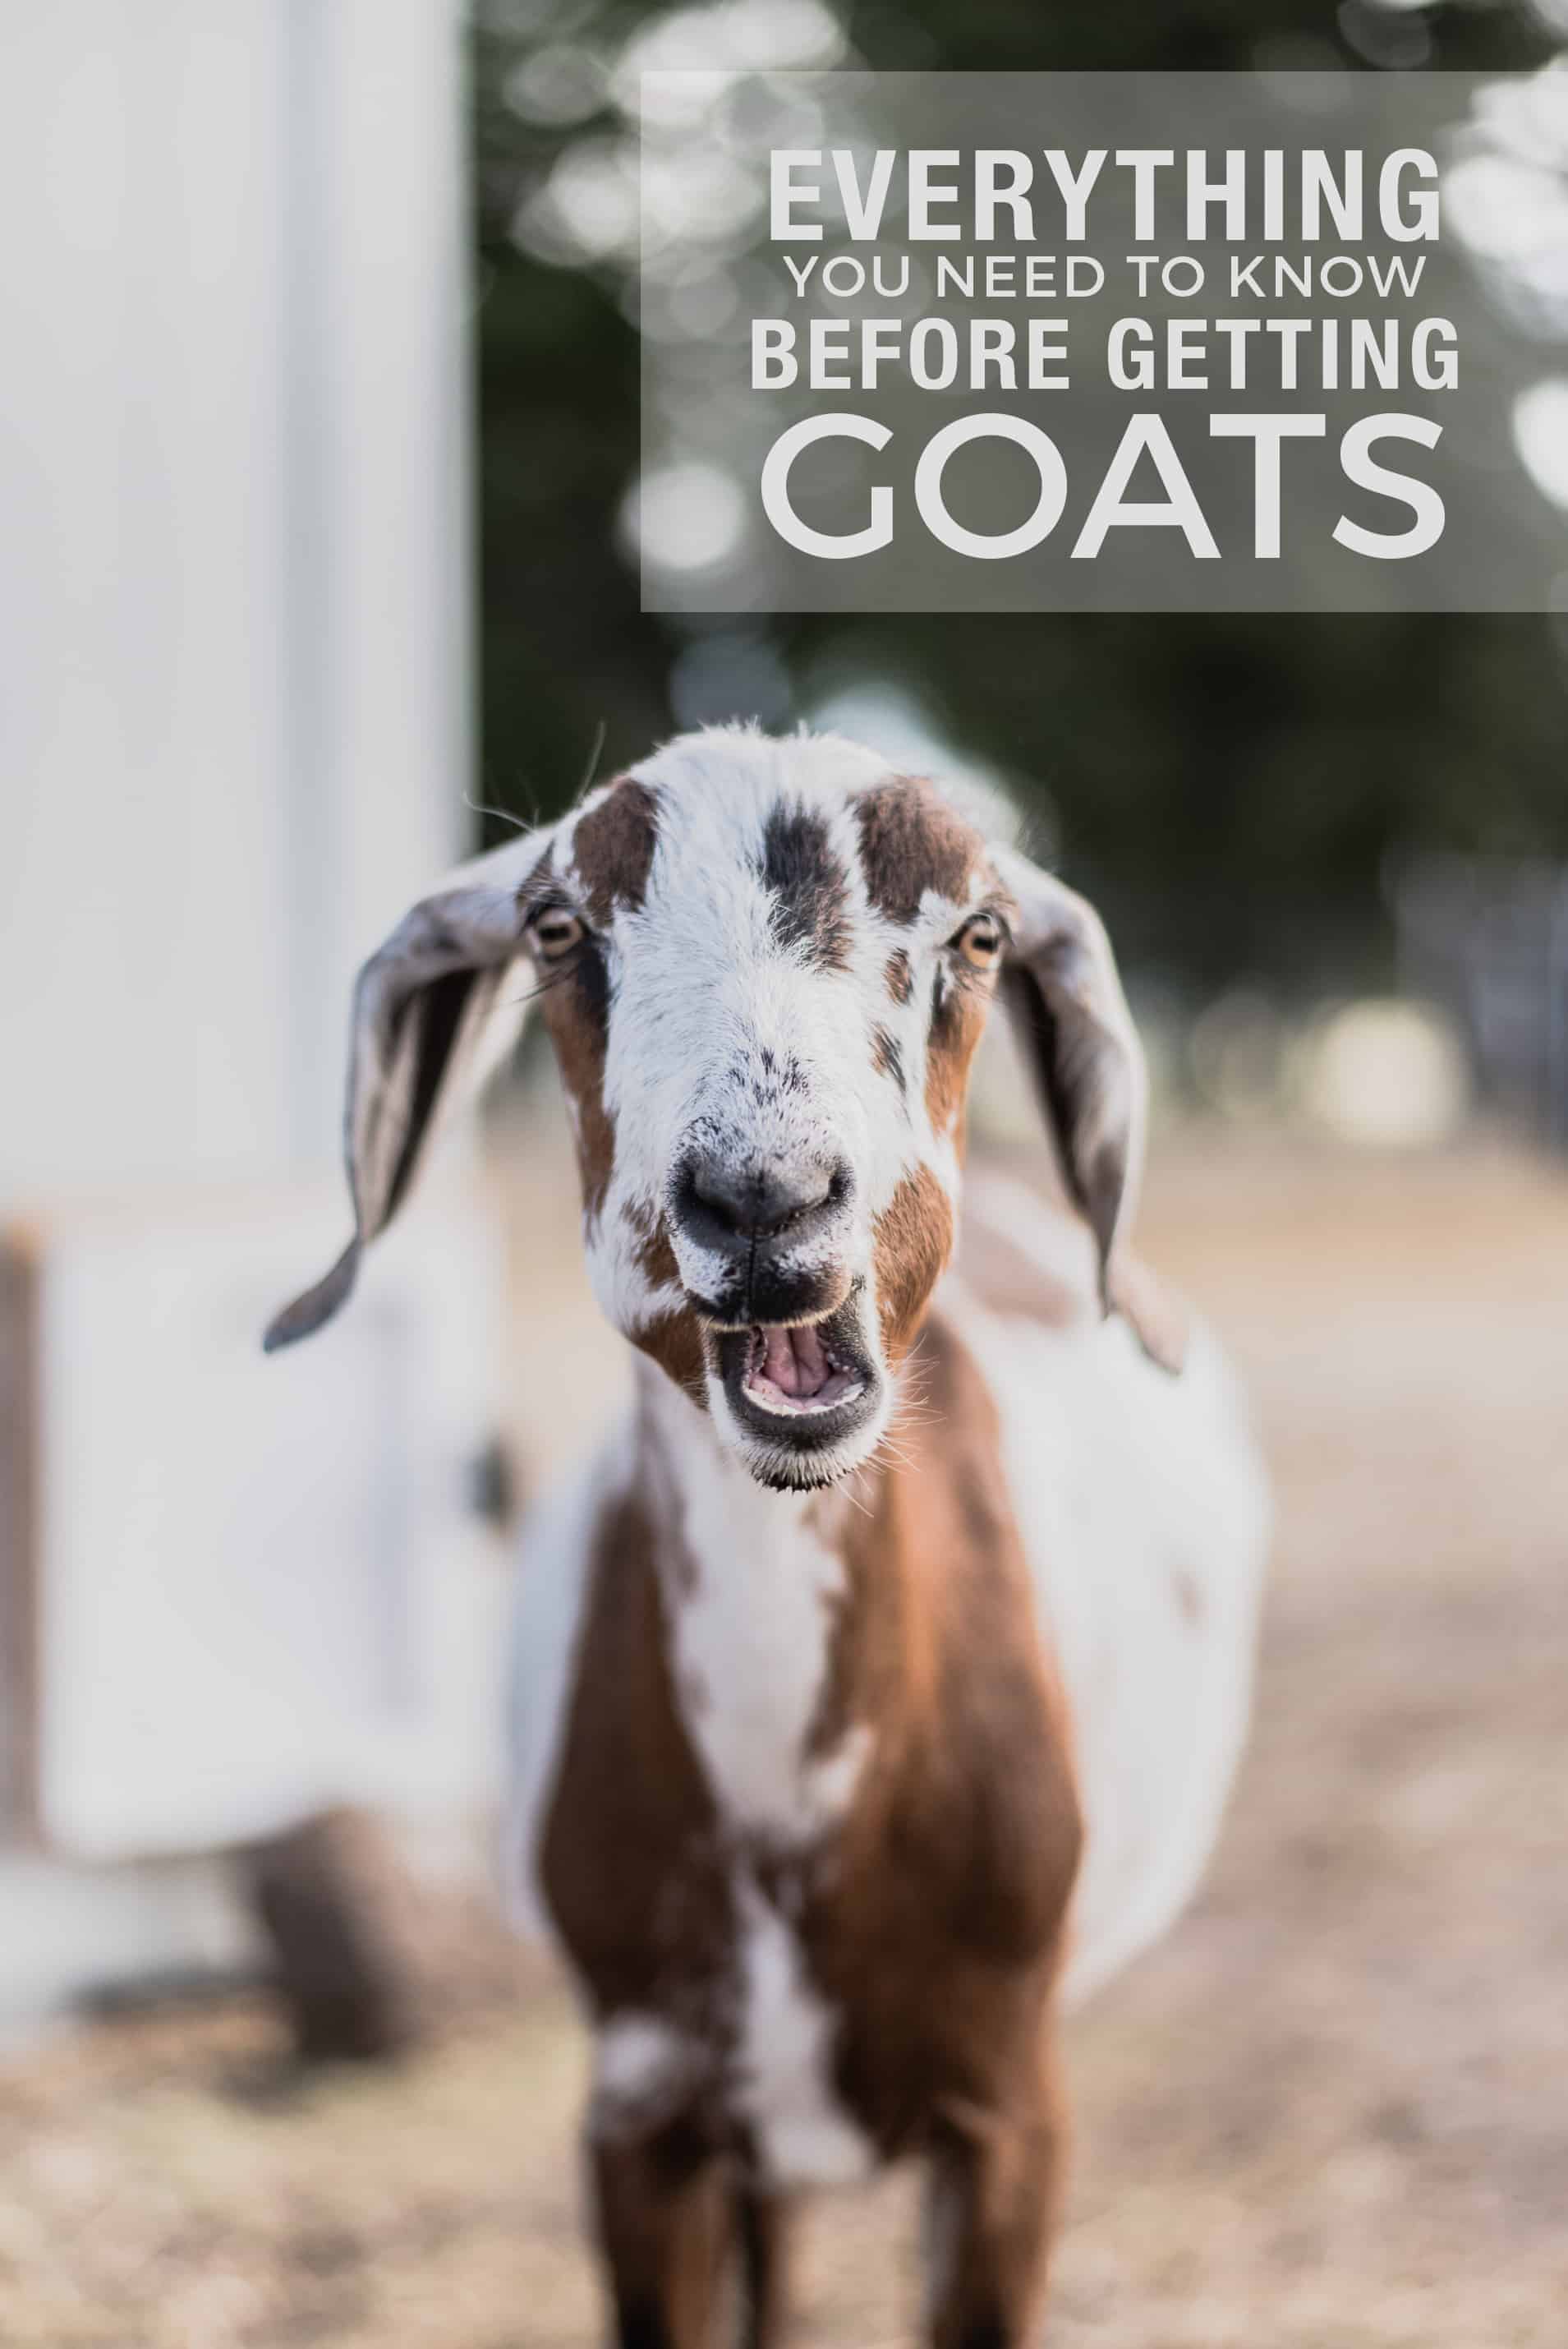 Caring for Goats: 15 Things I Wish I Knew Before Getting Goats - Boxwood Ave